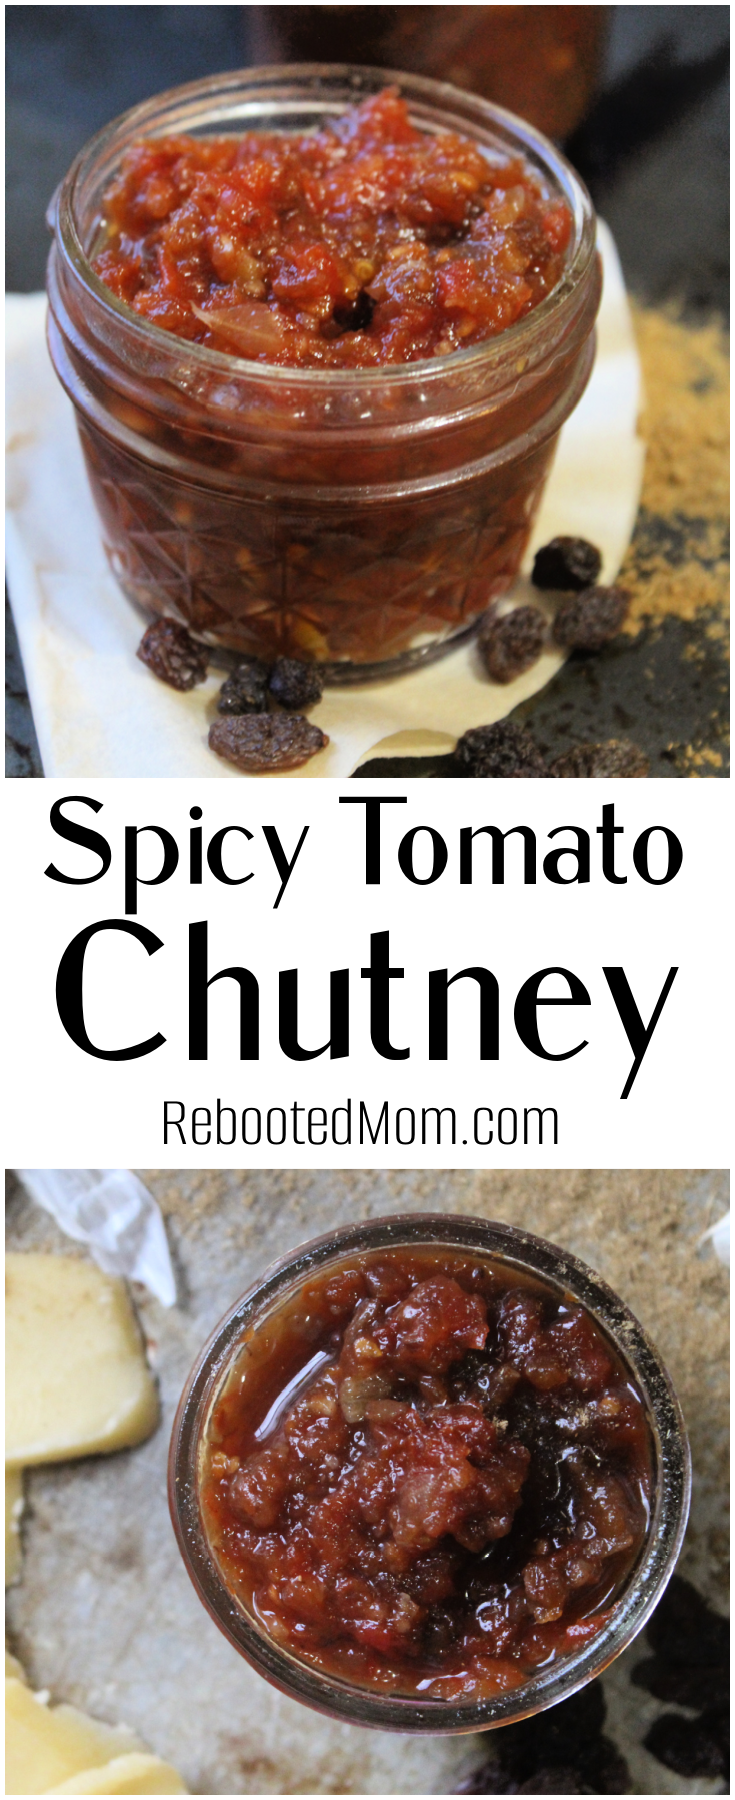 Easy and delicious Tomato Chutney recipe - the perfect way to use an abundance of garden tomatoes in a hurry and perfect condiment on meat, veggies, eggs and more! You will NEVER want to run out!